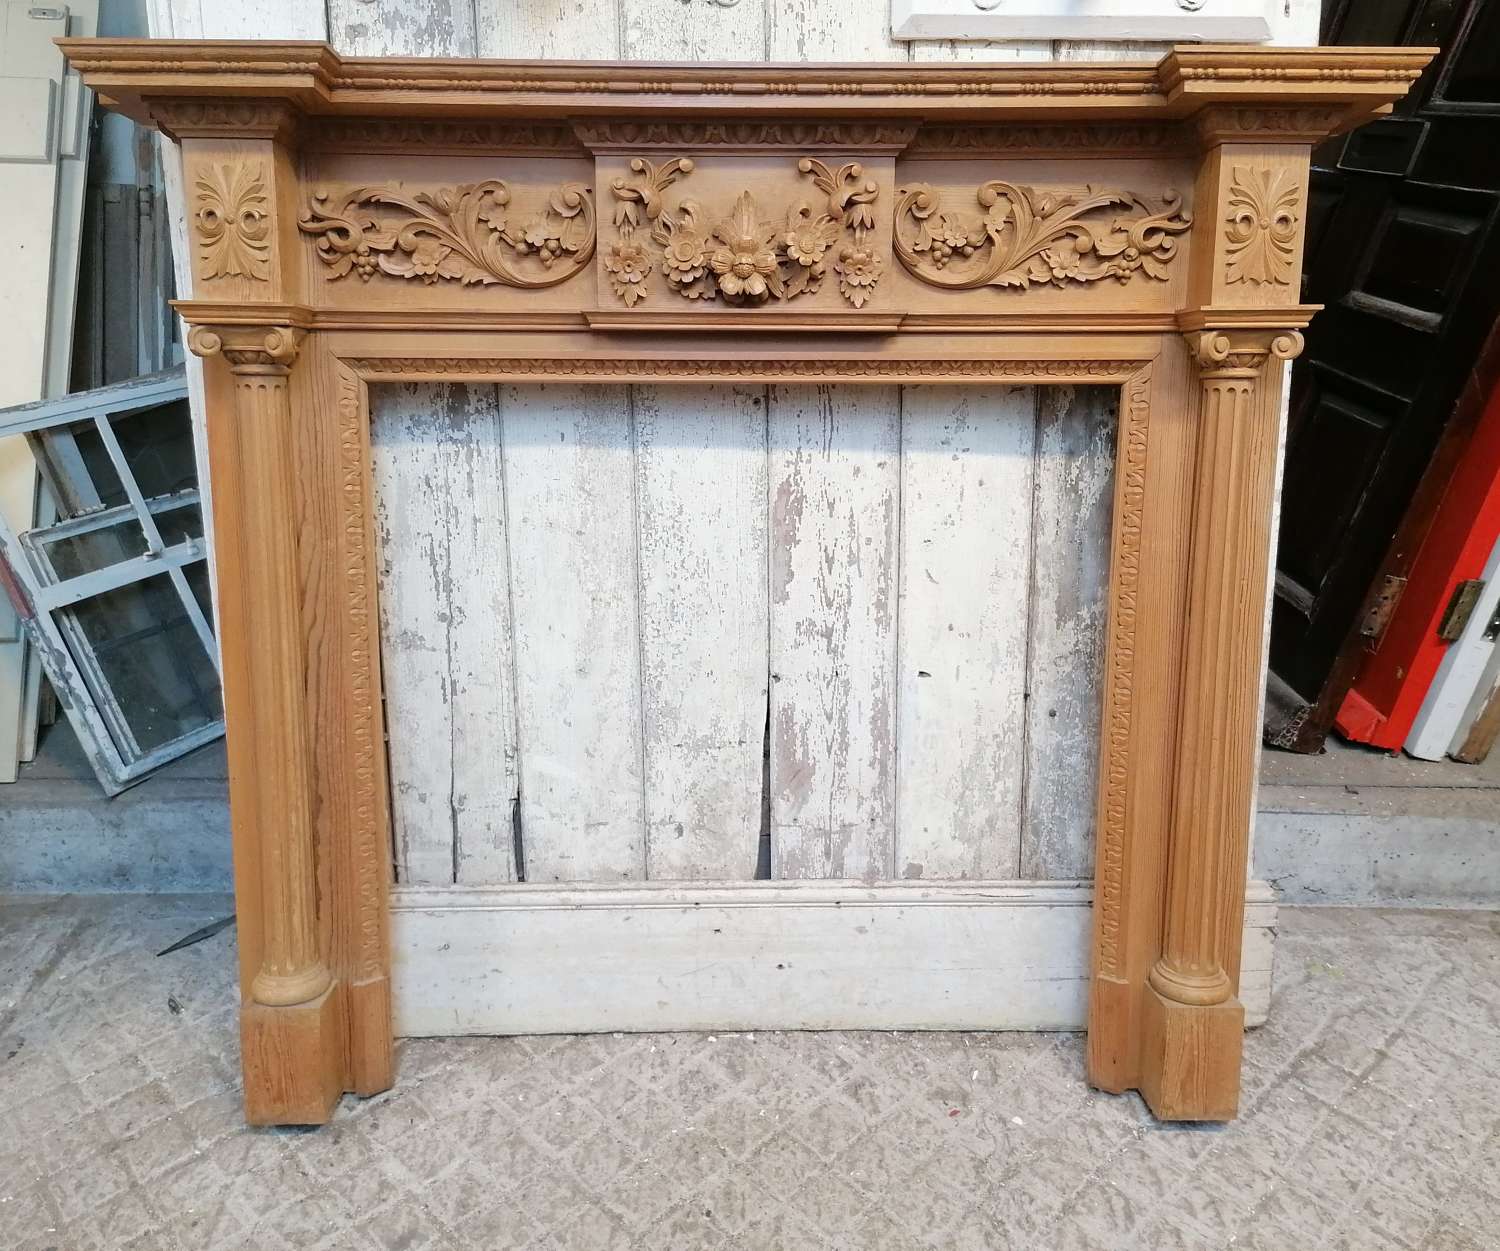 FS0179 A RECLAIMED LARGE DECORATIVE PINE FIRE SURROUND